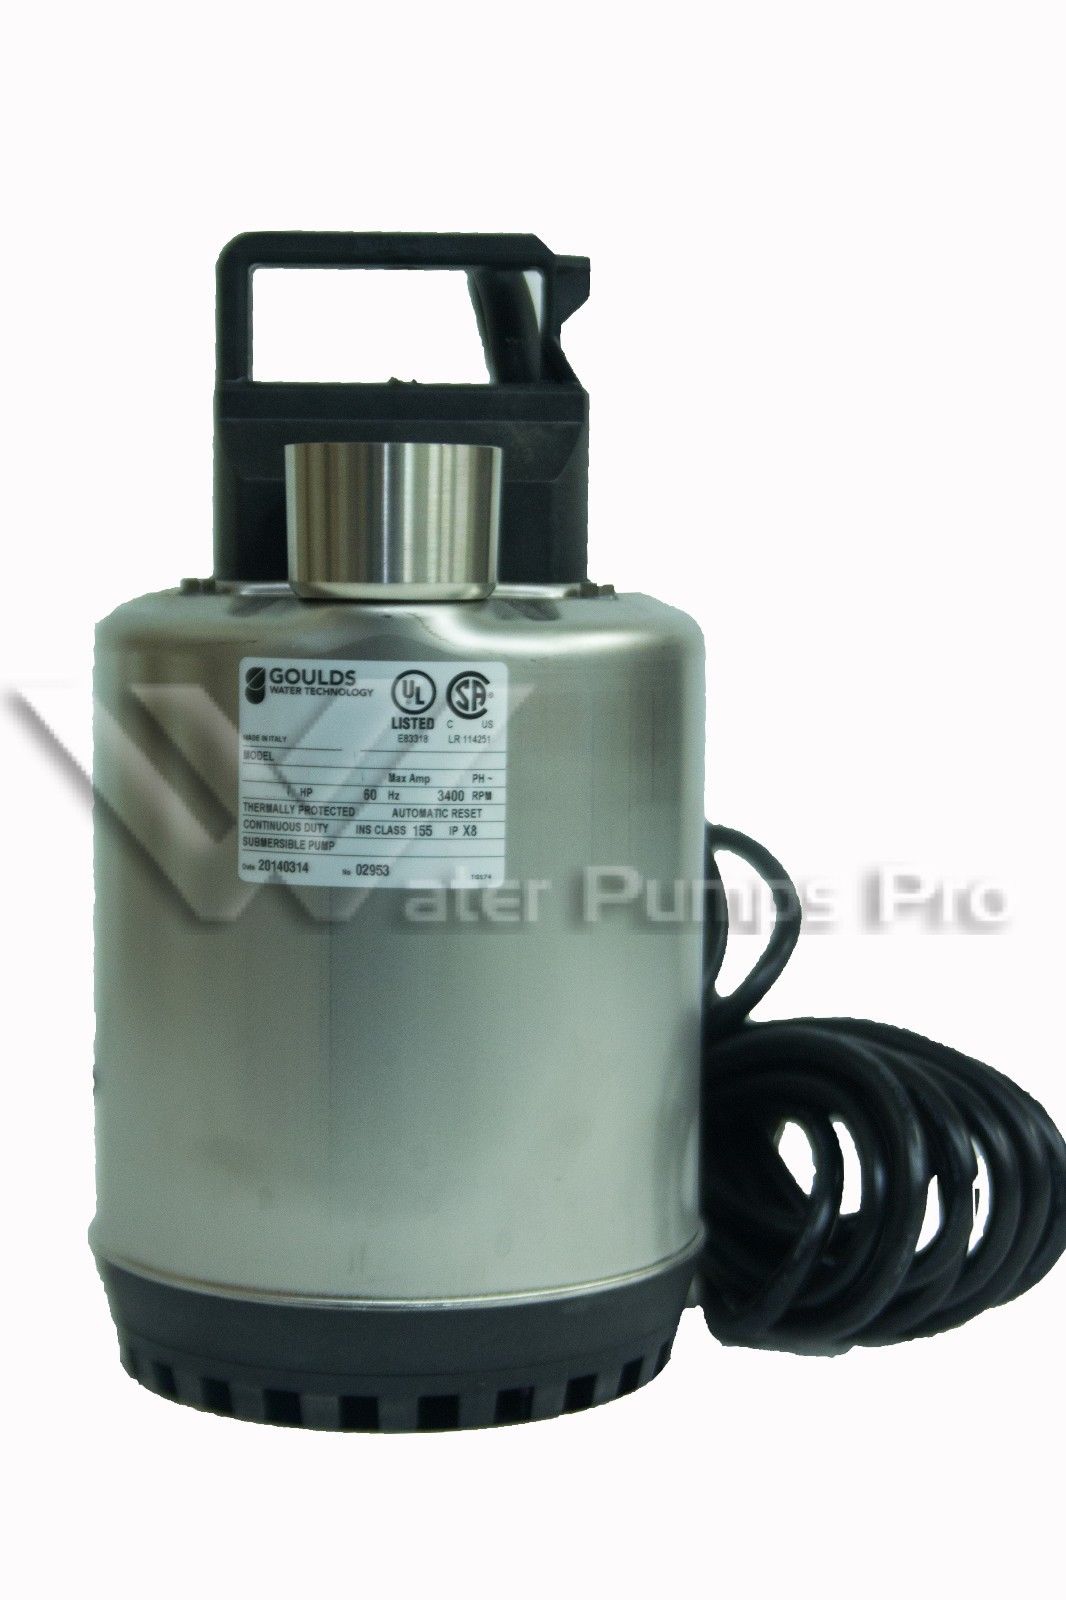 Goulds LSP0712F 3/4HP 230V- Submersible Sump Pump - Click Image to Close